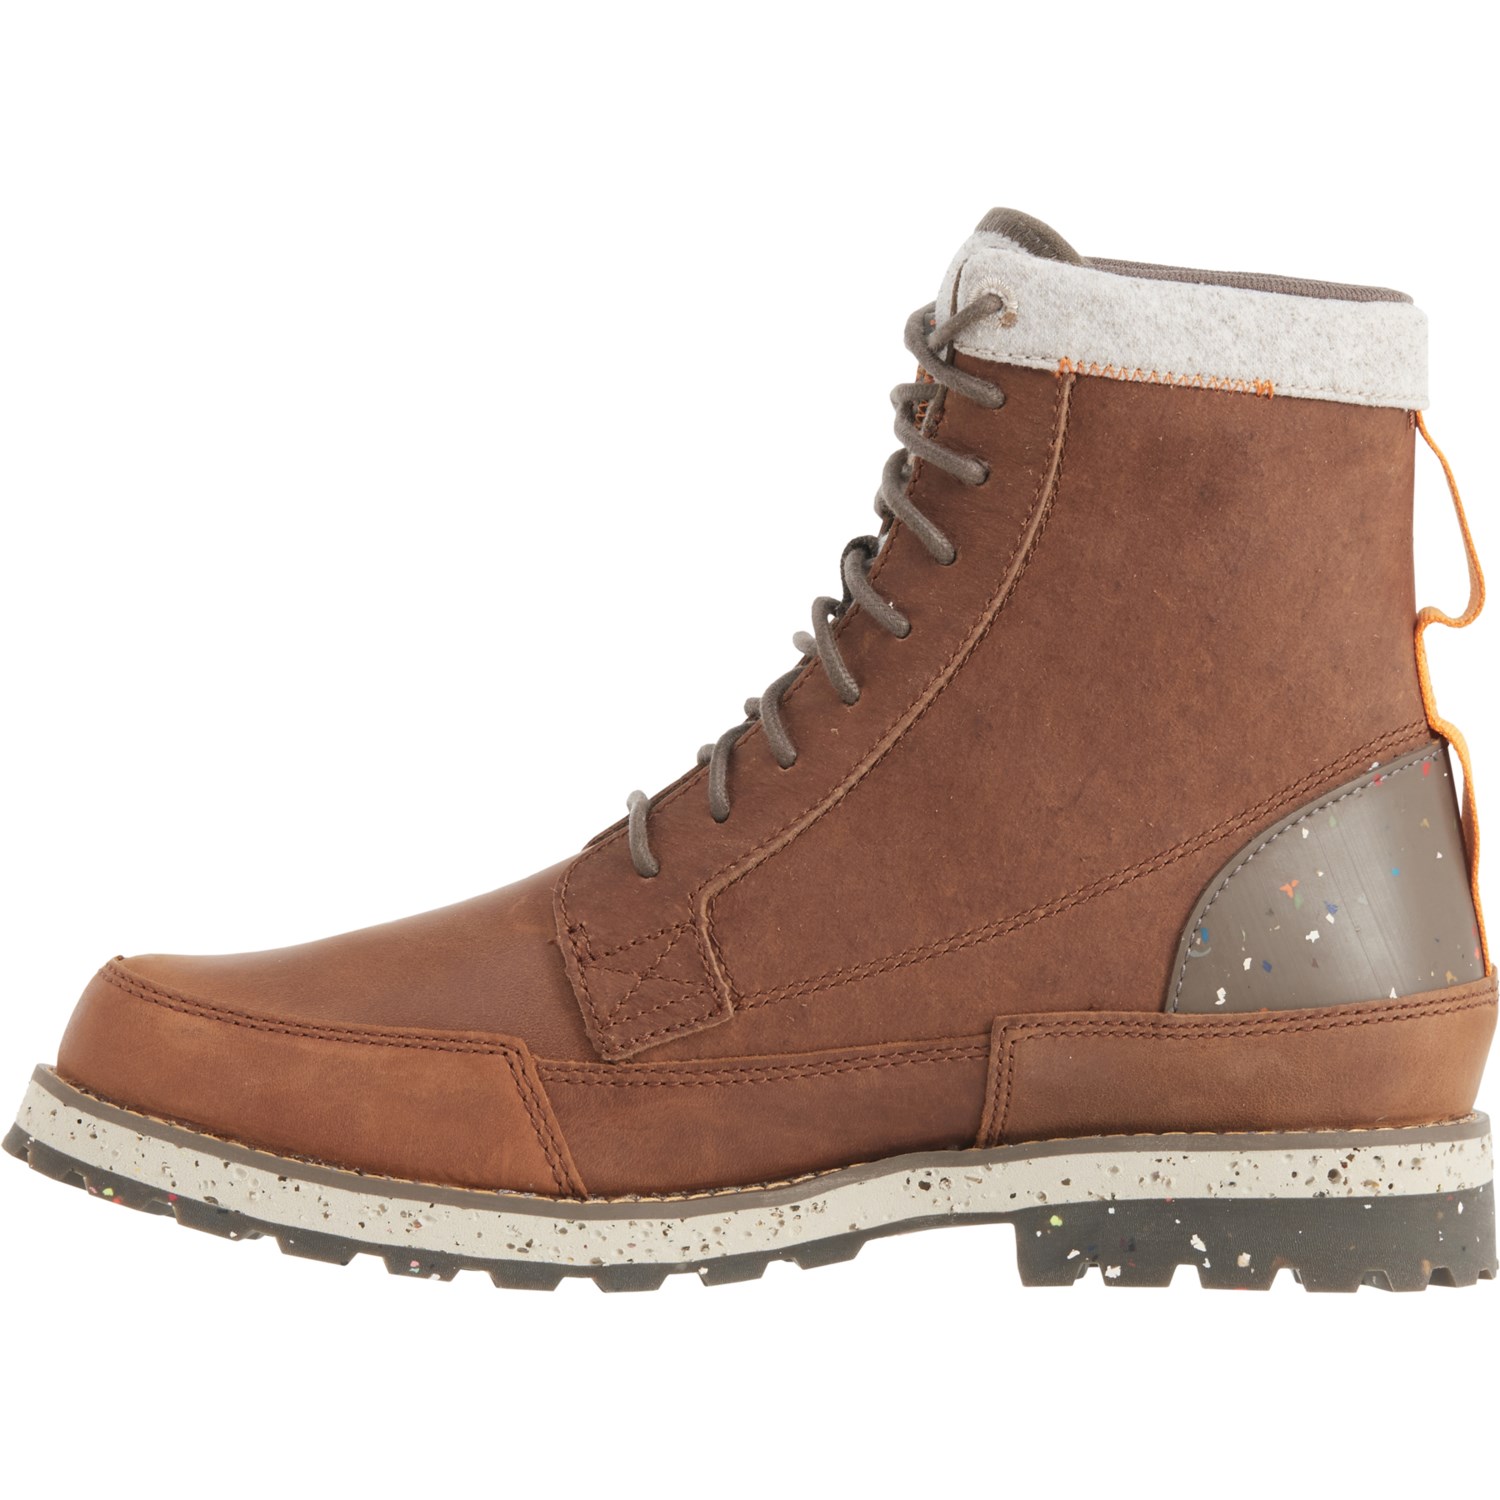 Timberland Timbercycle EK+ Boots (For Men) - Save 33%